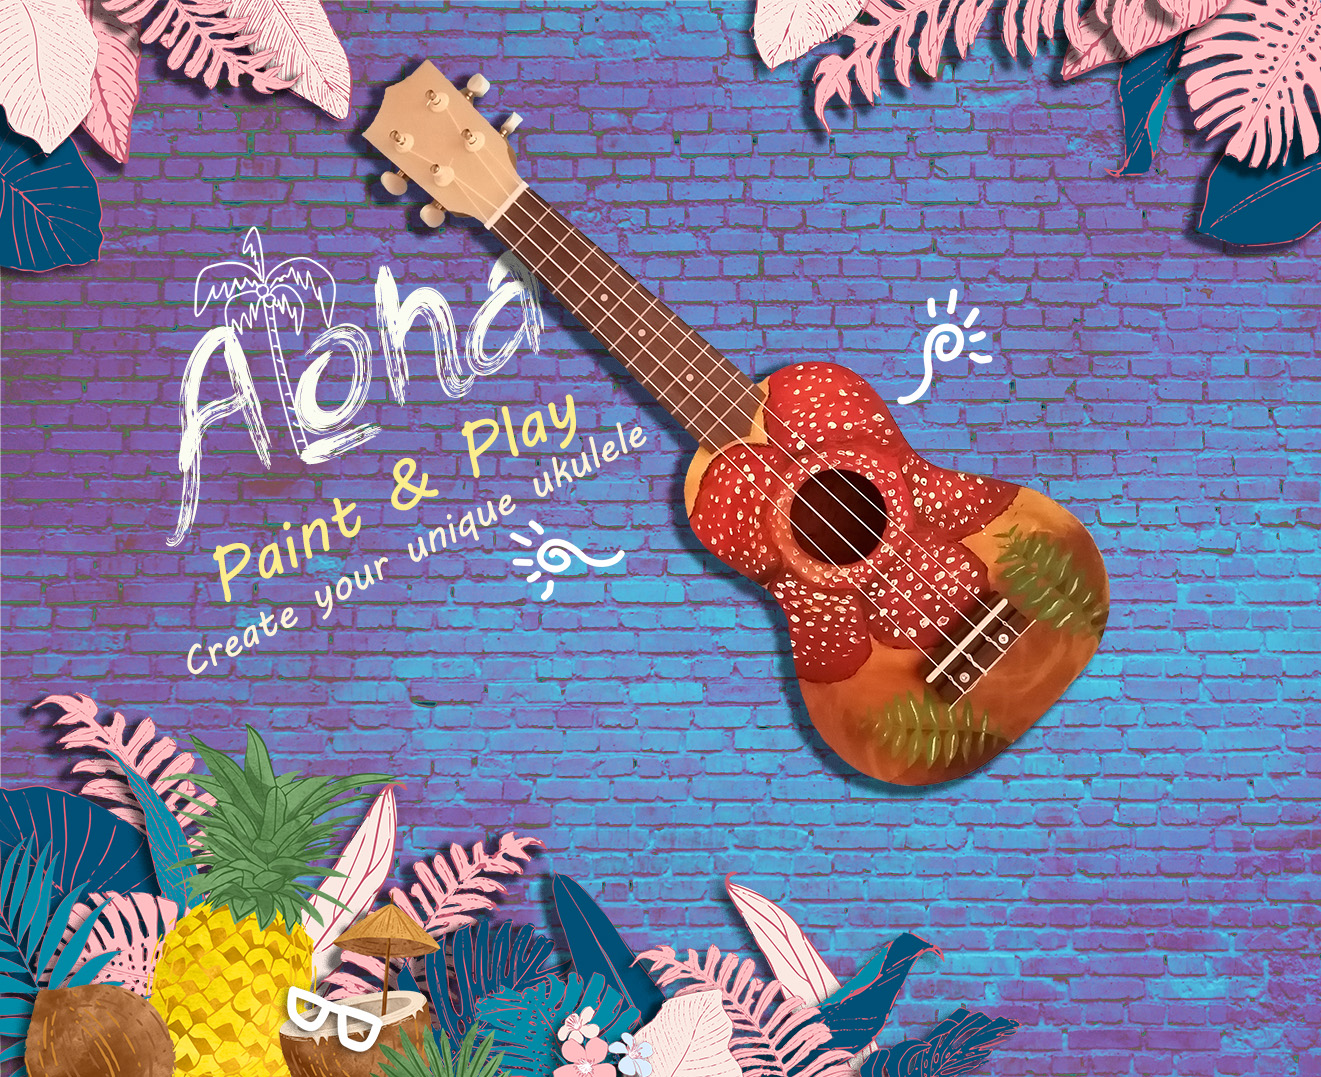 A Paint  Play with Your Unique Ukulele experience project by Yaymaker